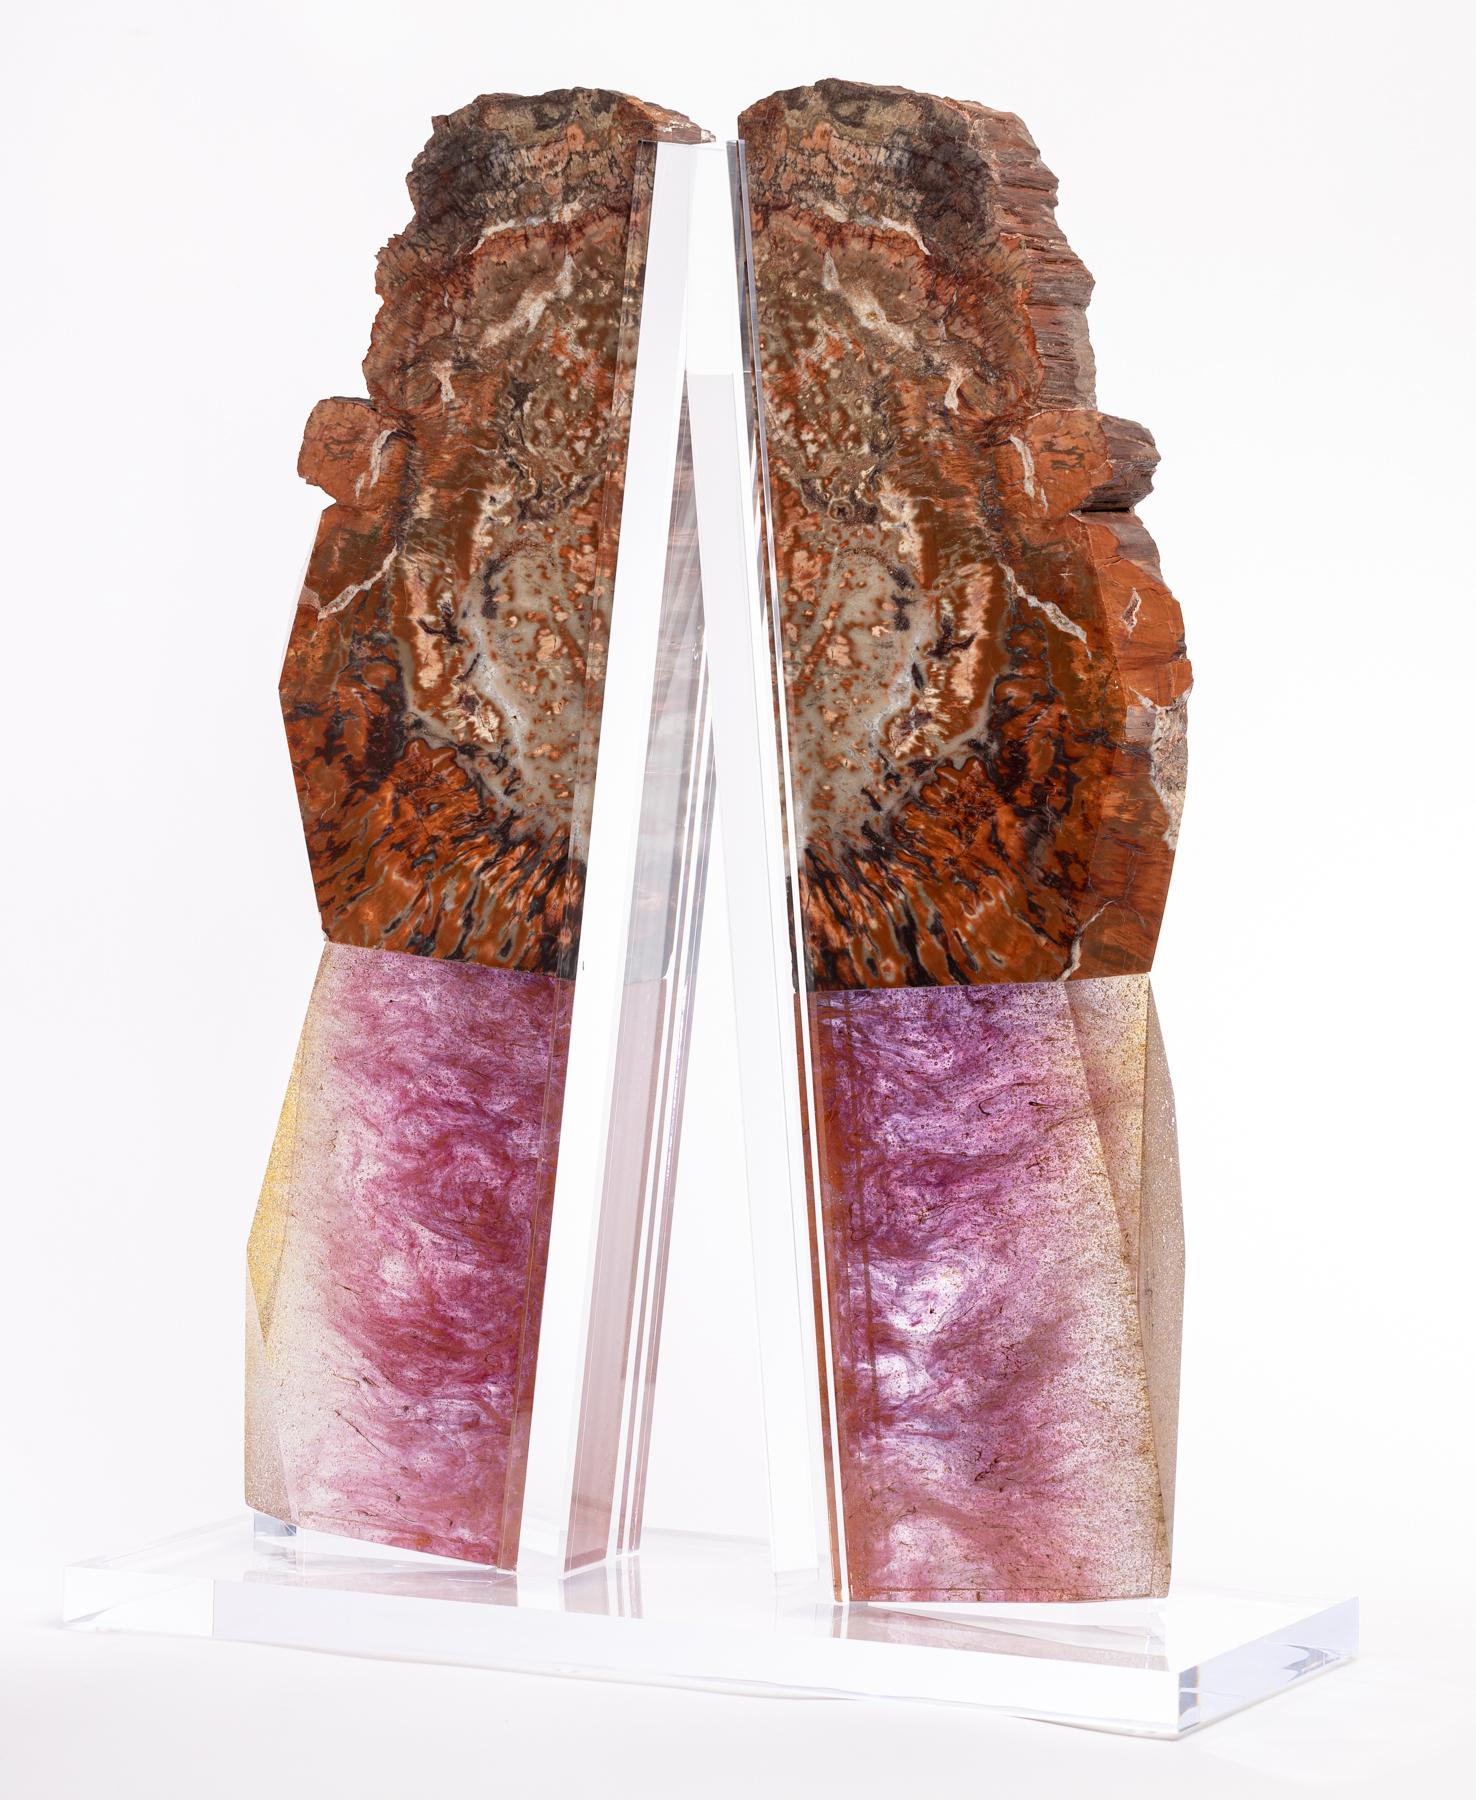 Roar- Arizona´s Petrified Wood and Boil Glass fusion Sculpture from TYME collection, a collaboration by Orfeo Quagliata and Ernesto Durán

TYME collection 
A dance between purity and detail bring a creation of unique pieces merging nature’s gems